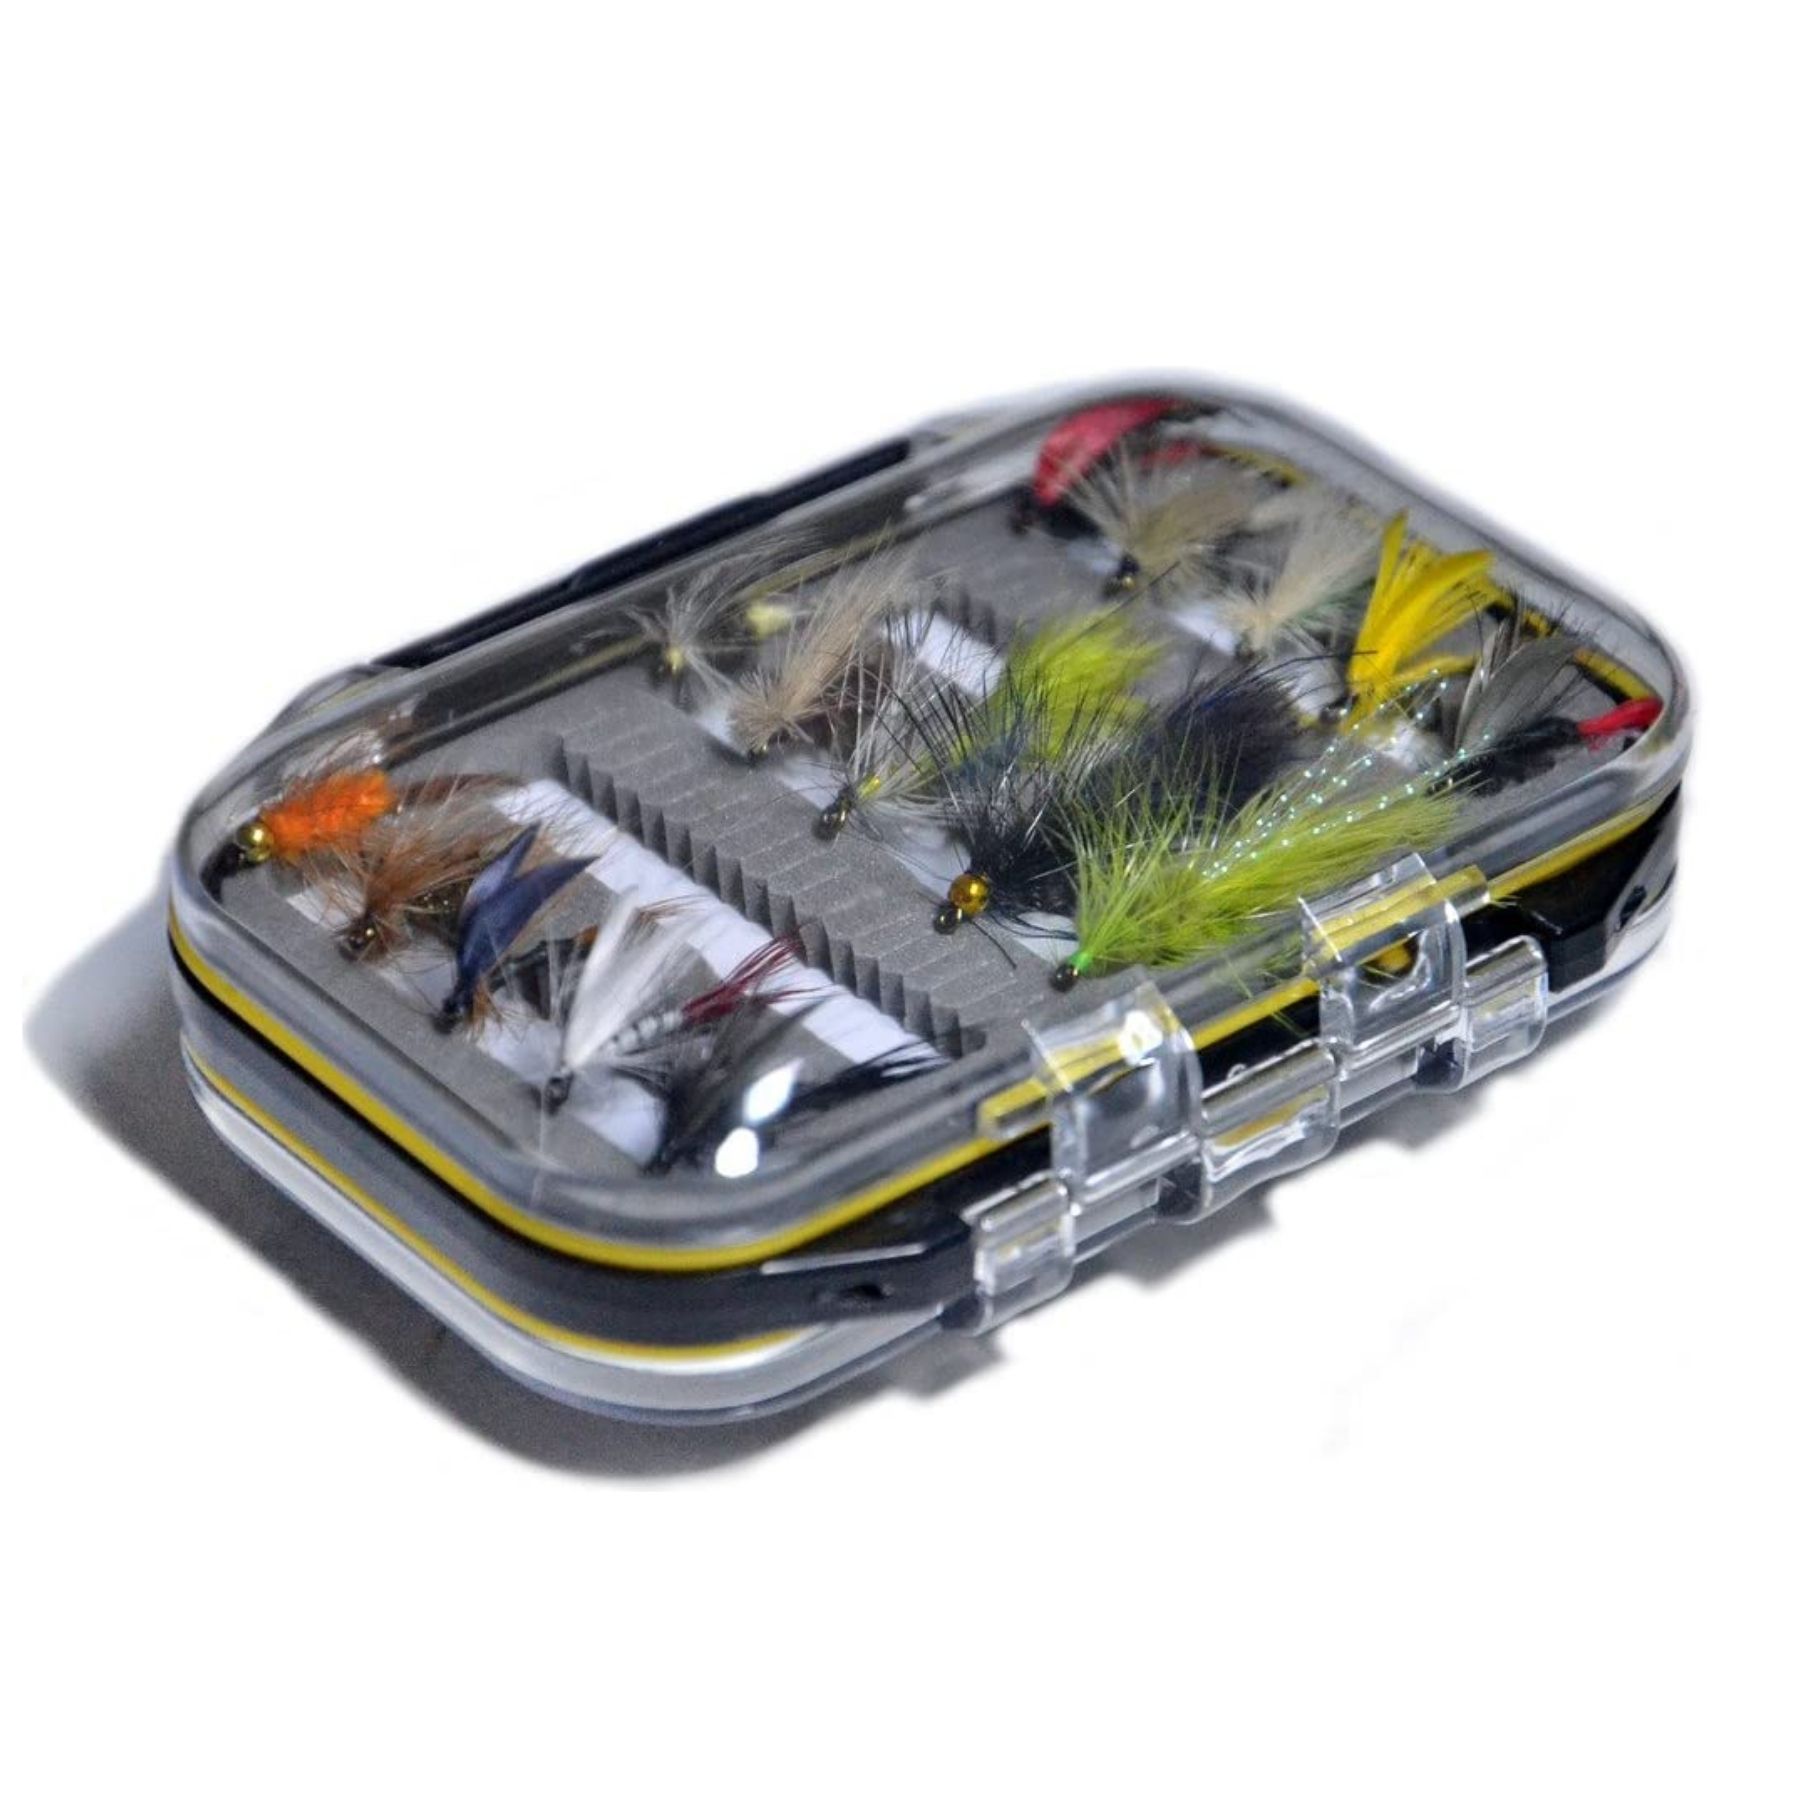 Outdoor Planet Waterproof Fly Box with Dry/Wet/Nymph/Streamer Trout Fly Fishing Flies Lure